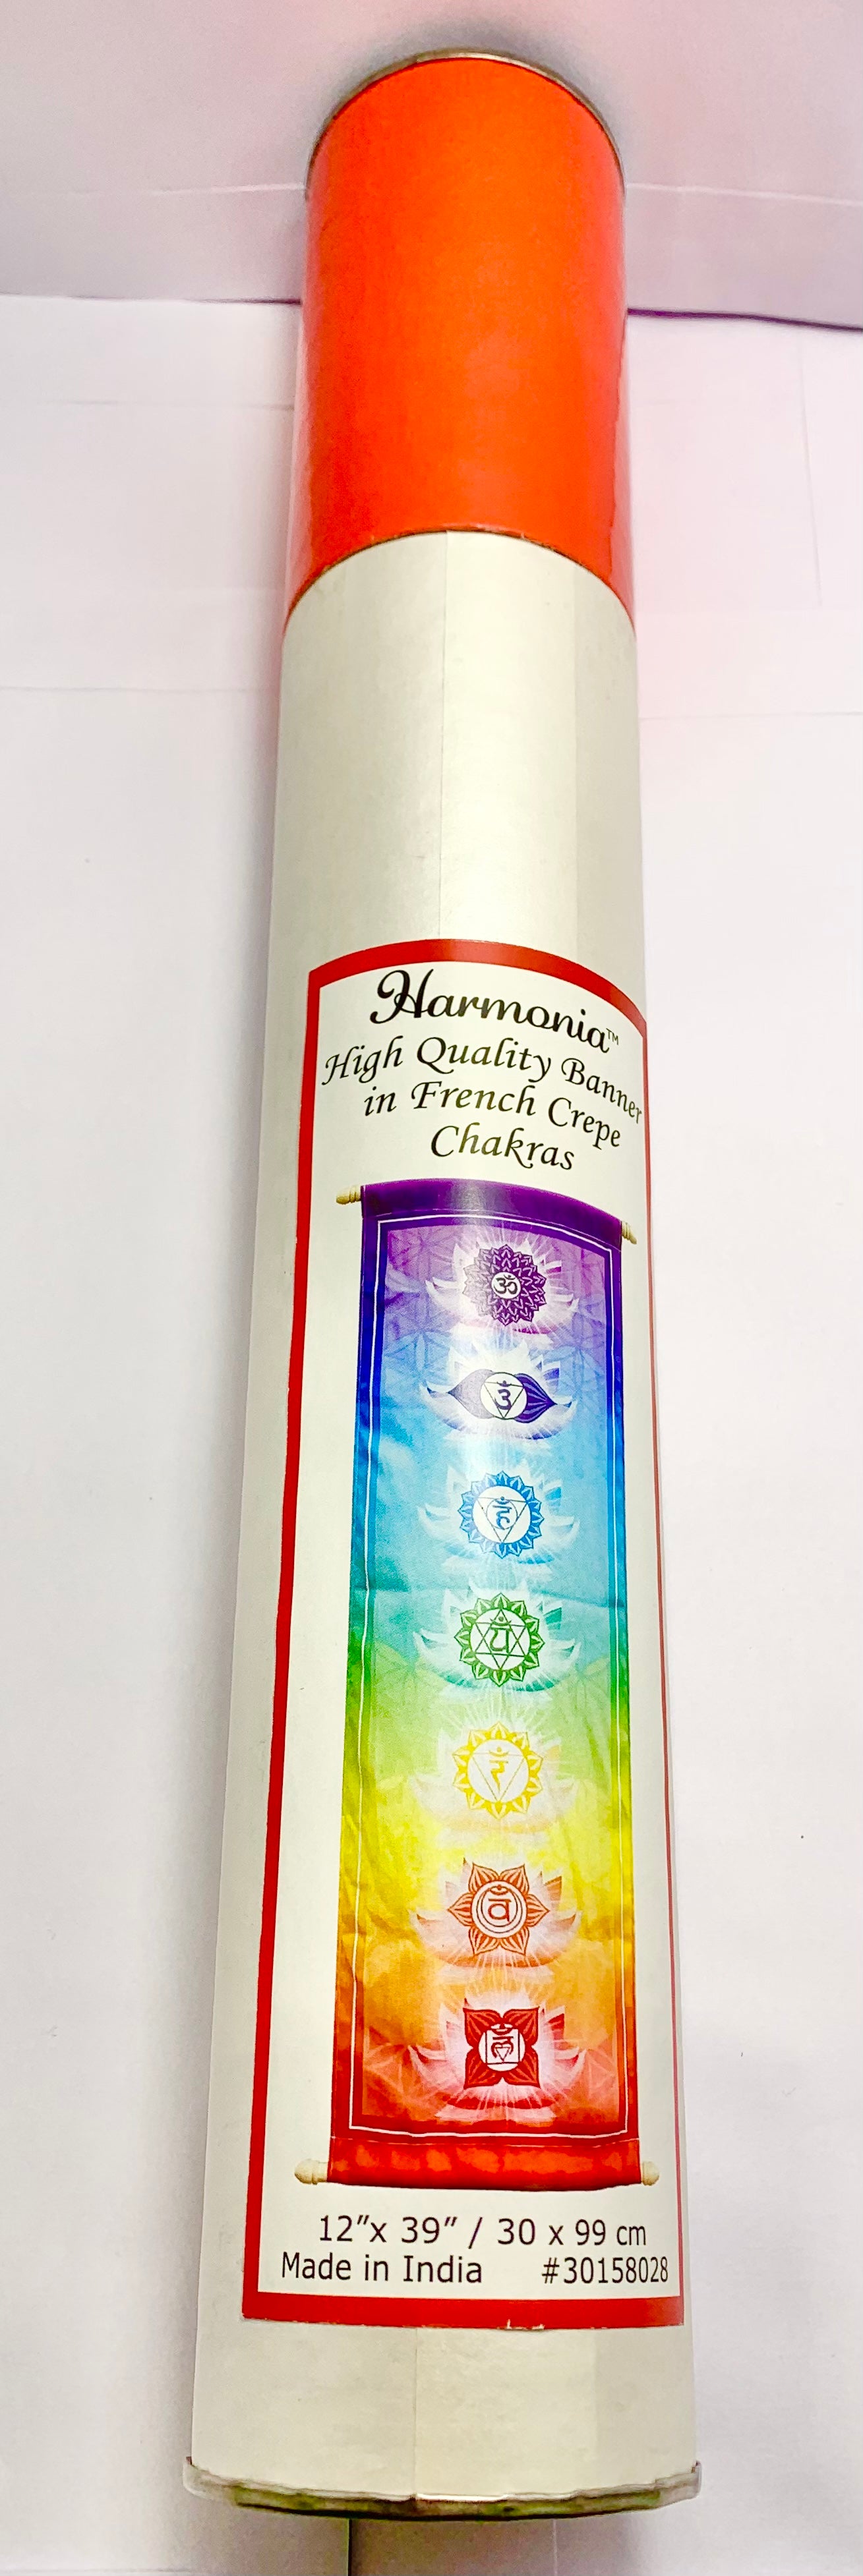 Energy Flow 7 Chakra Wall Hanging Art Banner Print on French Crepe